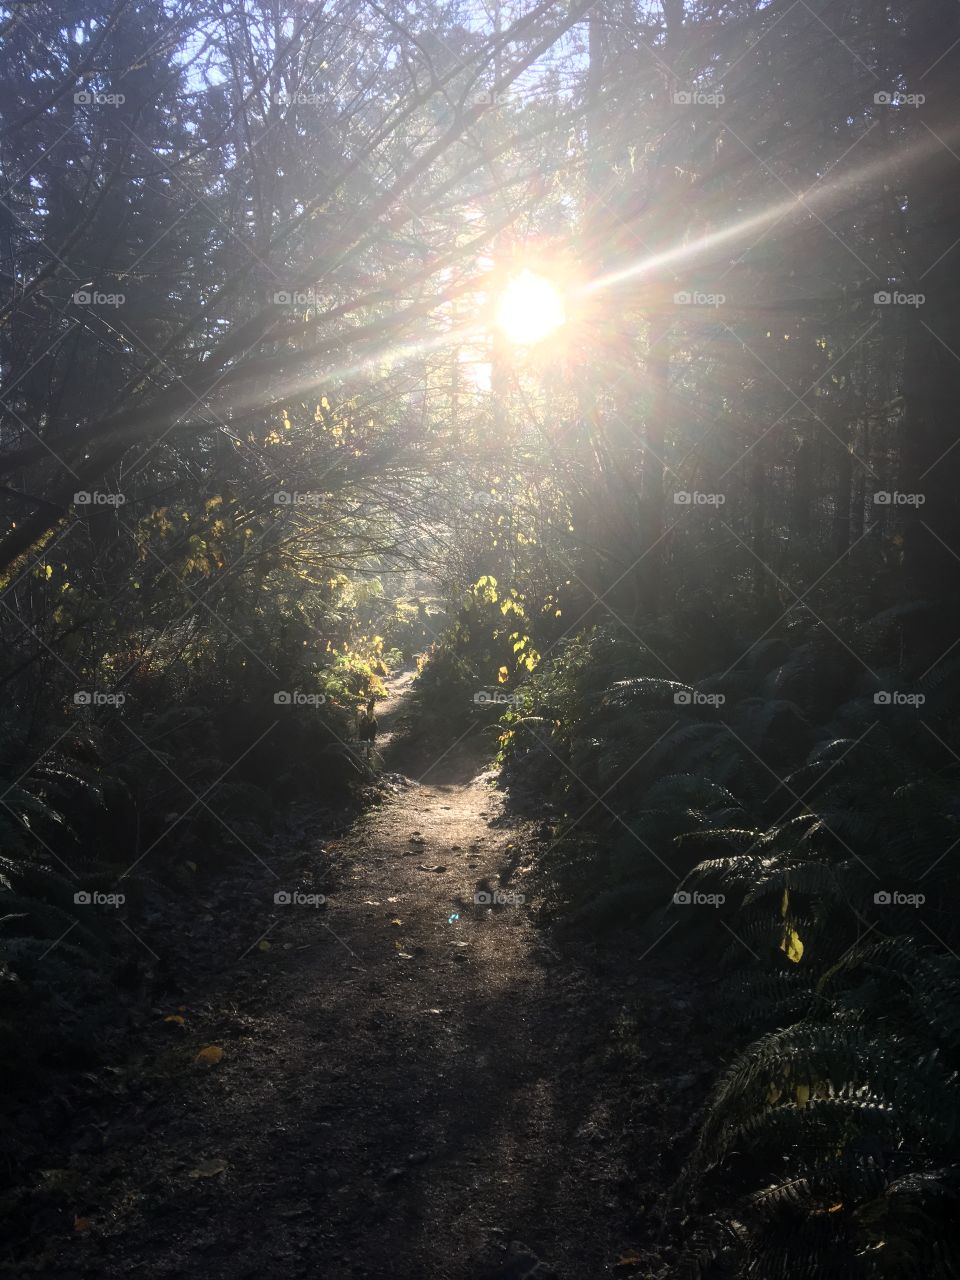 Low sun illuminates the trail ahead in the forest